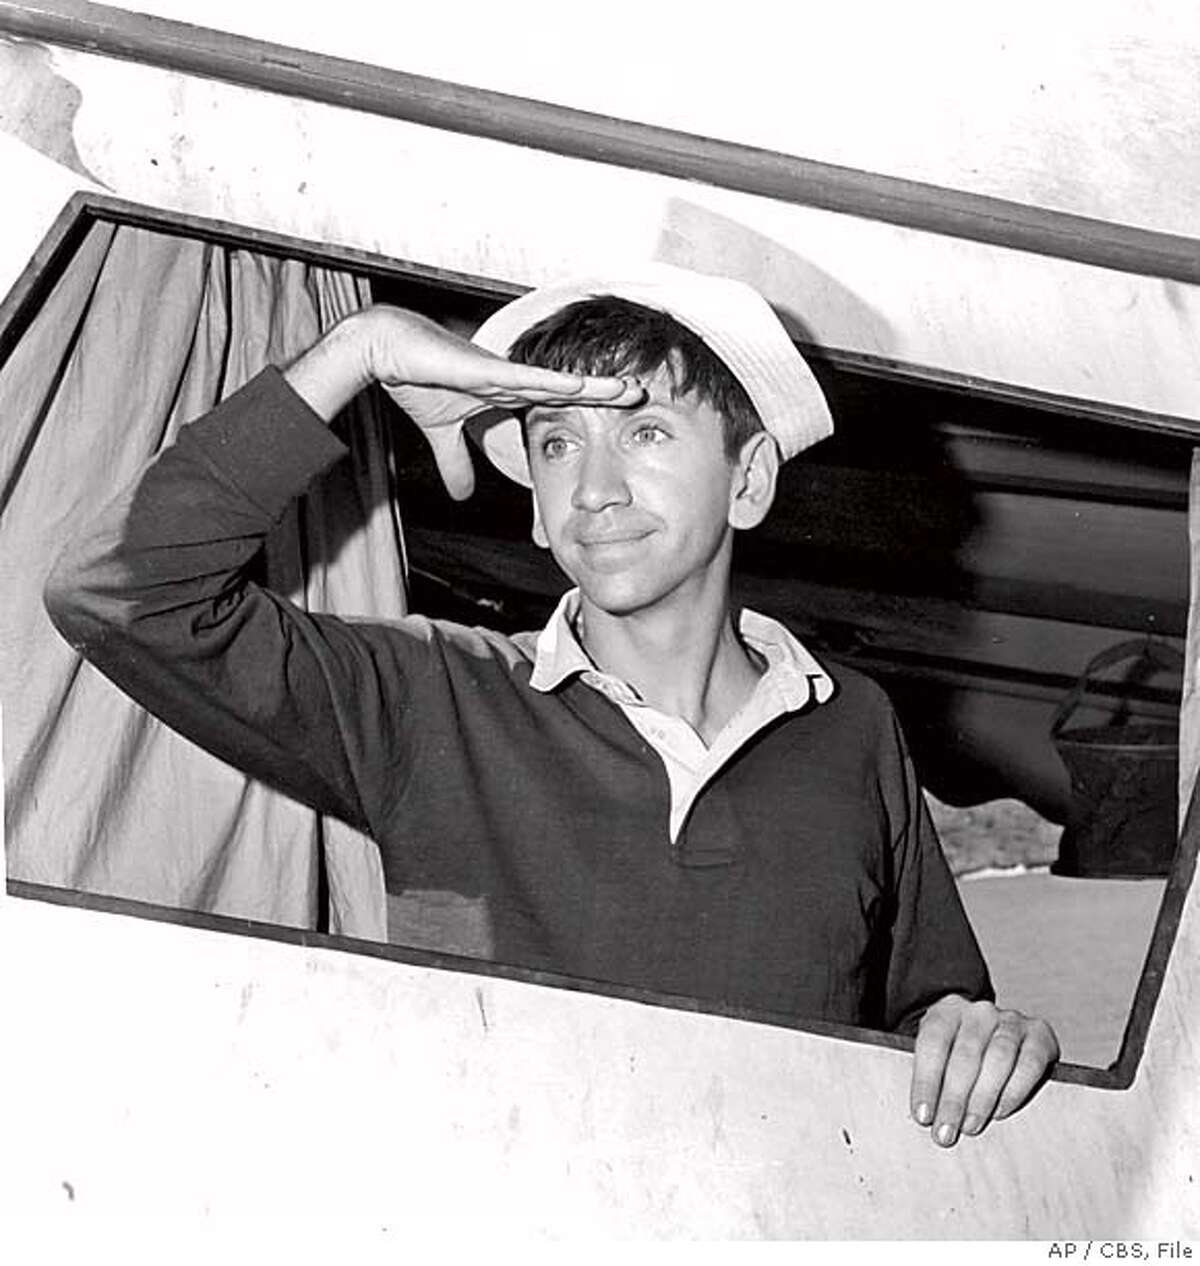 ** FILE ** In this Nov. 21, 1963 file photo released by CBS, Bob Denver, who plays the title role in the "Gilligan's Island" television comedy is seen. Denver died Friday, Sept. 2, 2005, at Wake Forest University Baptist Hospital in North Carolina of complications from treatment he was receiving for cancer, his agent said. He was 70. (AP Photo/CBS, File) A NOV 1963 B&W FILE PHOTO PROVIDED BY CBS . . MAGS OUT, ONLINE OUT INTERNET OUT NO ARCHIVES. NORTH AMERICA USE ONLY. ONE-TIME EDITORIAL NEWSPAPER USE ONLY. THIS IMAGE CANNOT BE ARCHIVED, SOLD, LEASED OR SHARED. THIS IMAGE CANNOT BE DISTRIBUTED